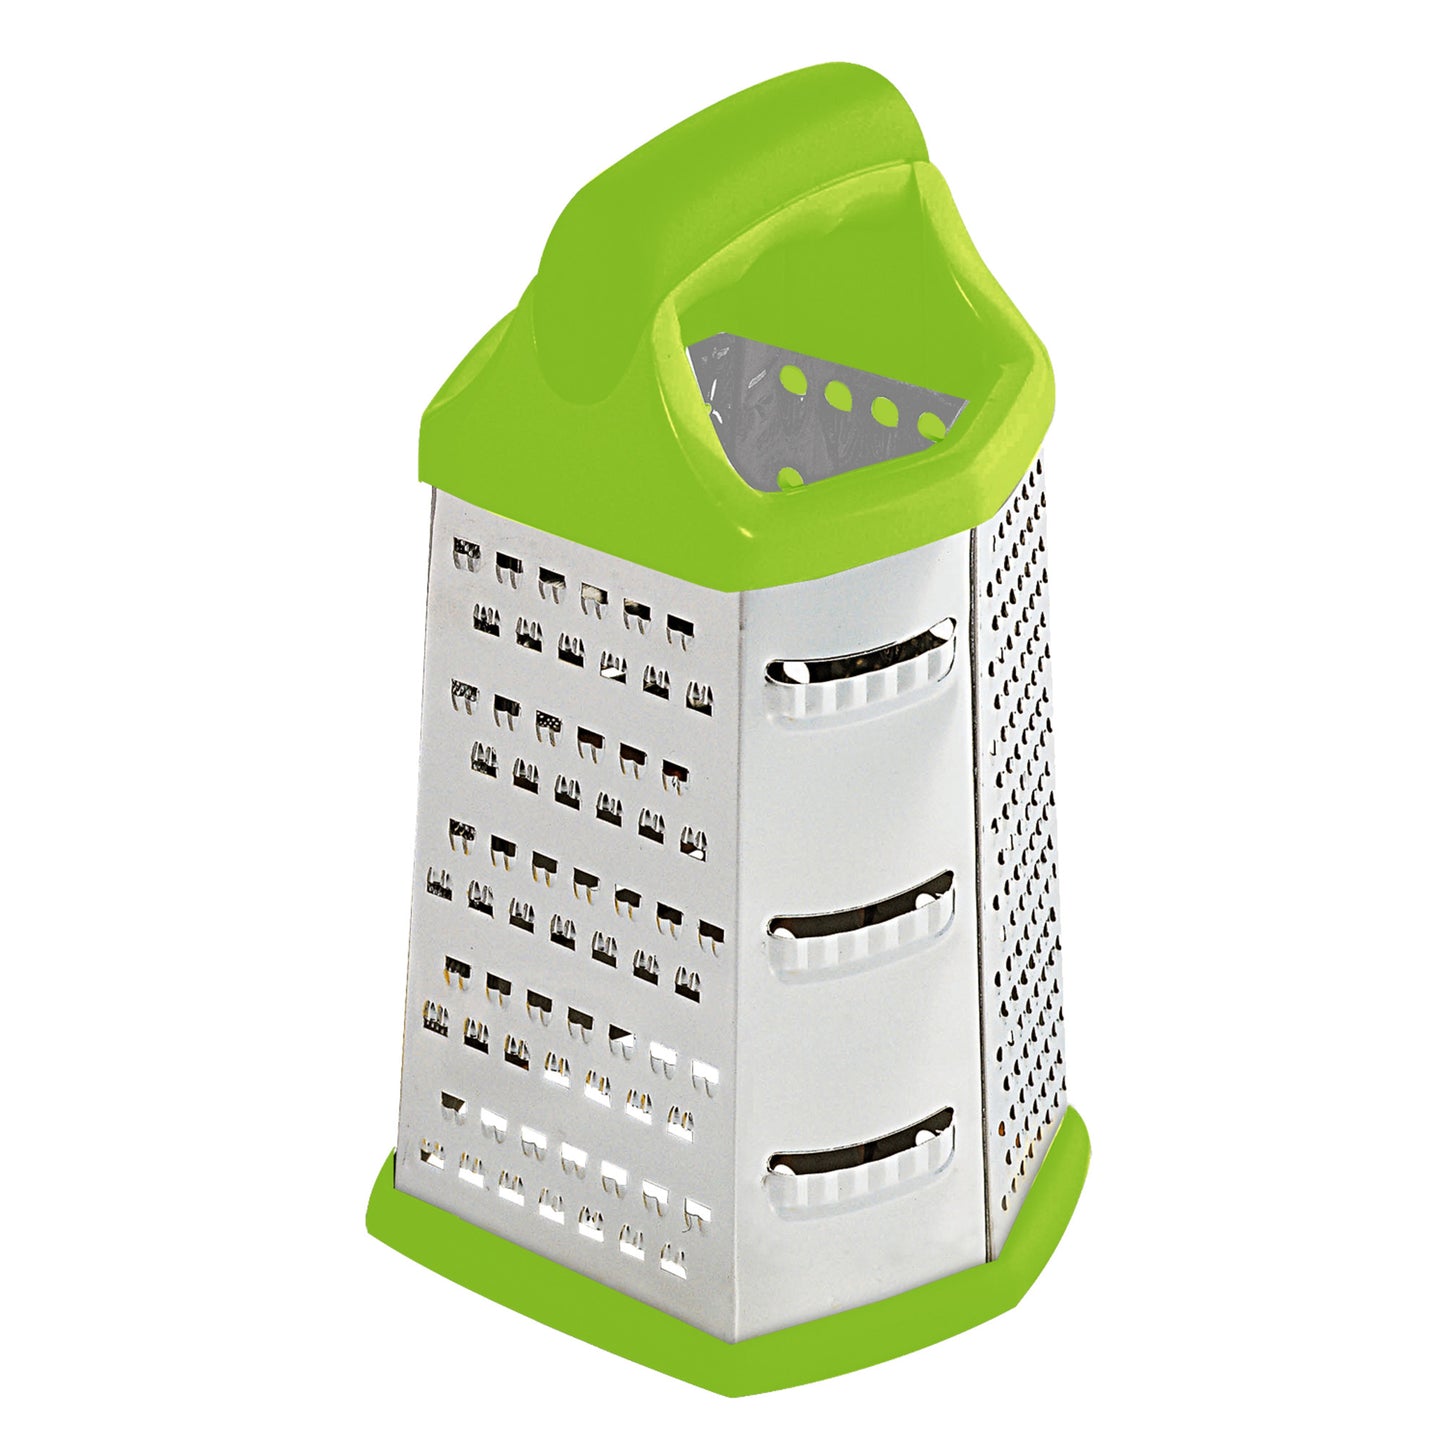 Home Basics 6 Sided Stainless Steel Cheese Grater - Green